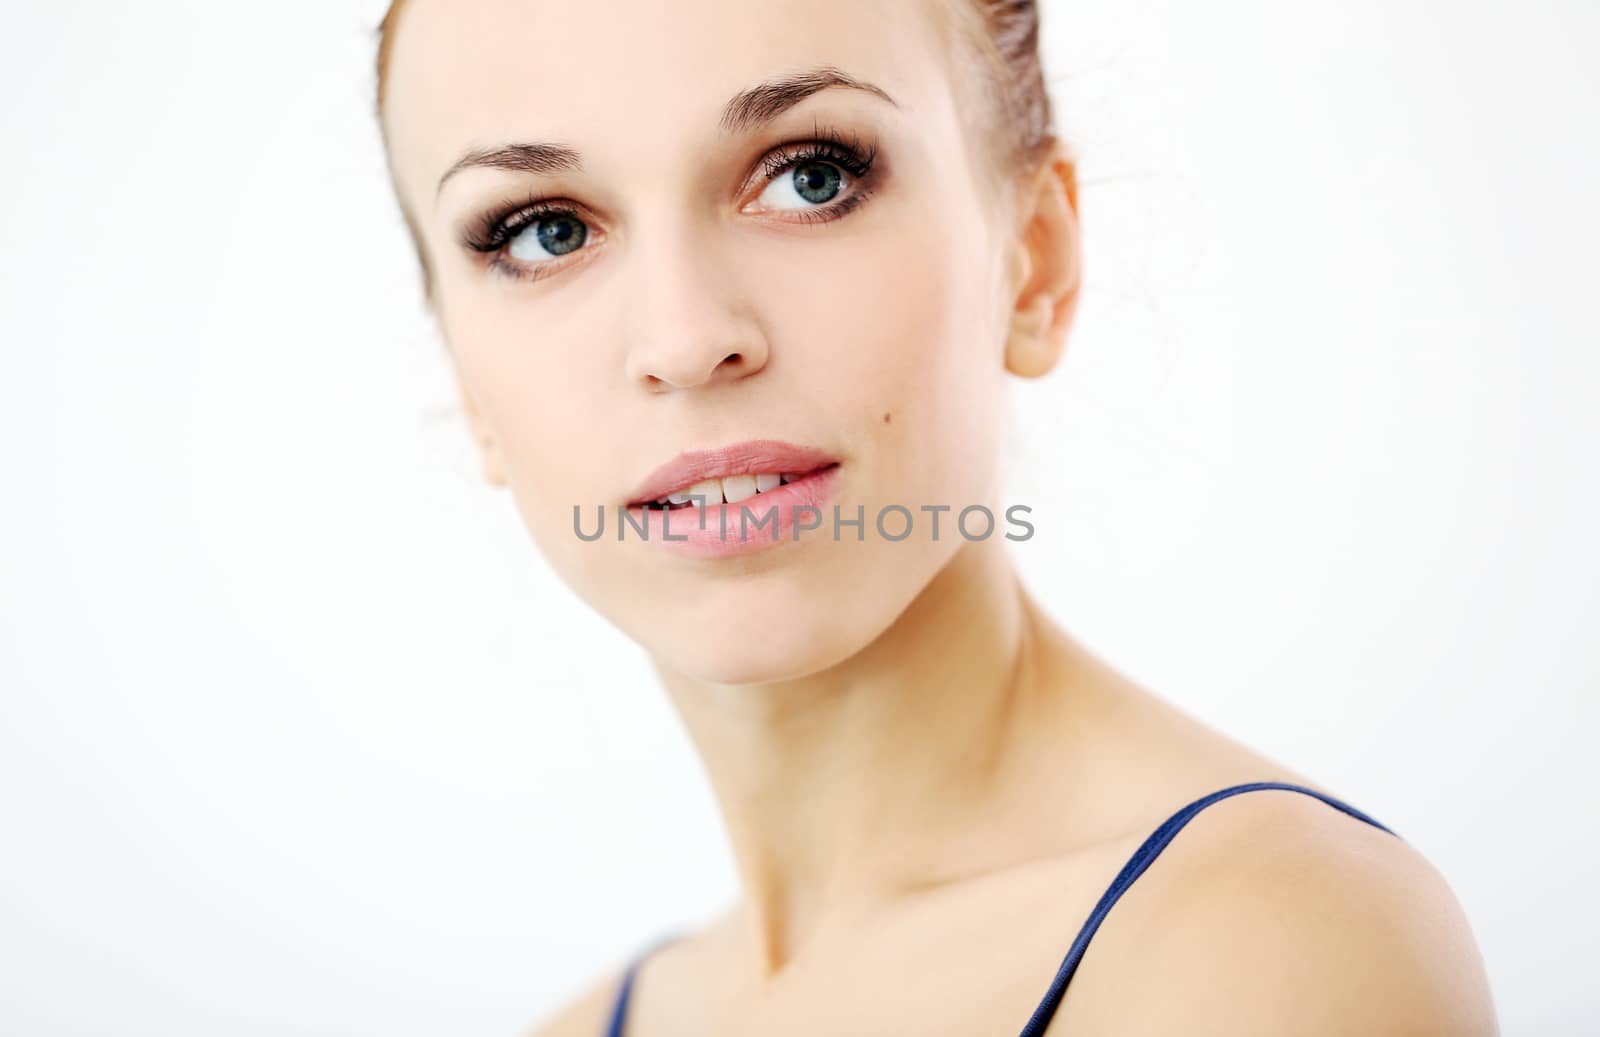 Portrait of a beautiful girl who is looking away over a white background